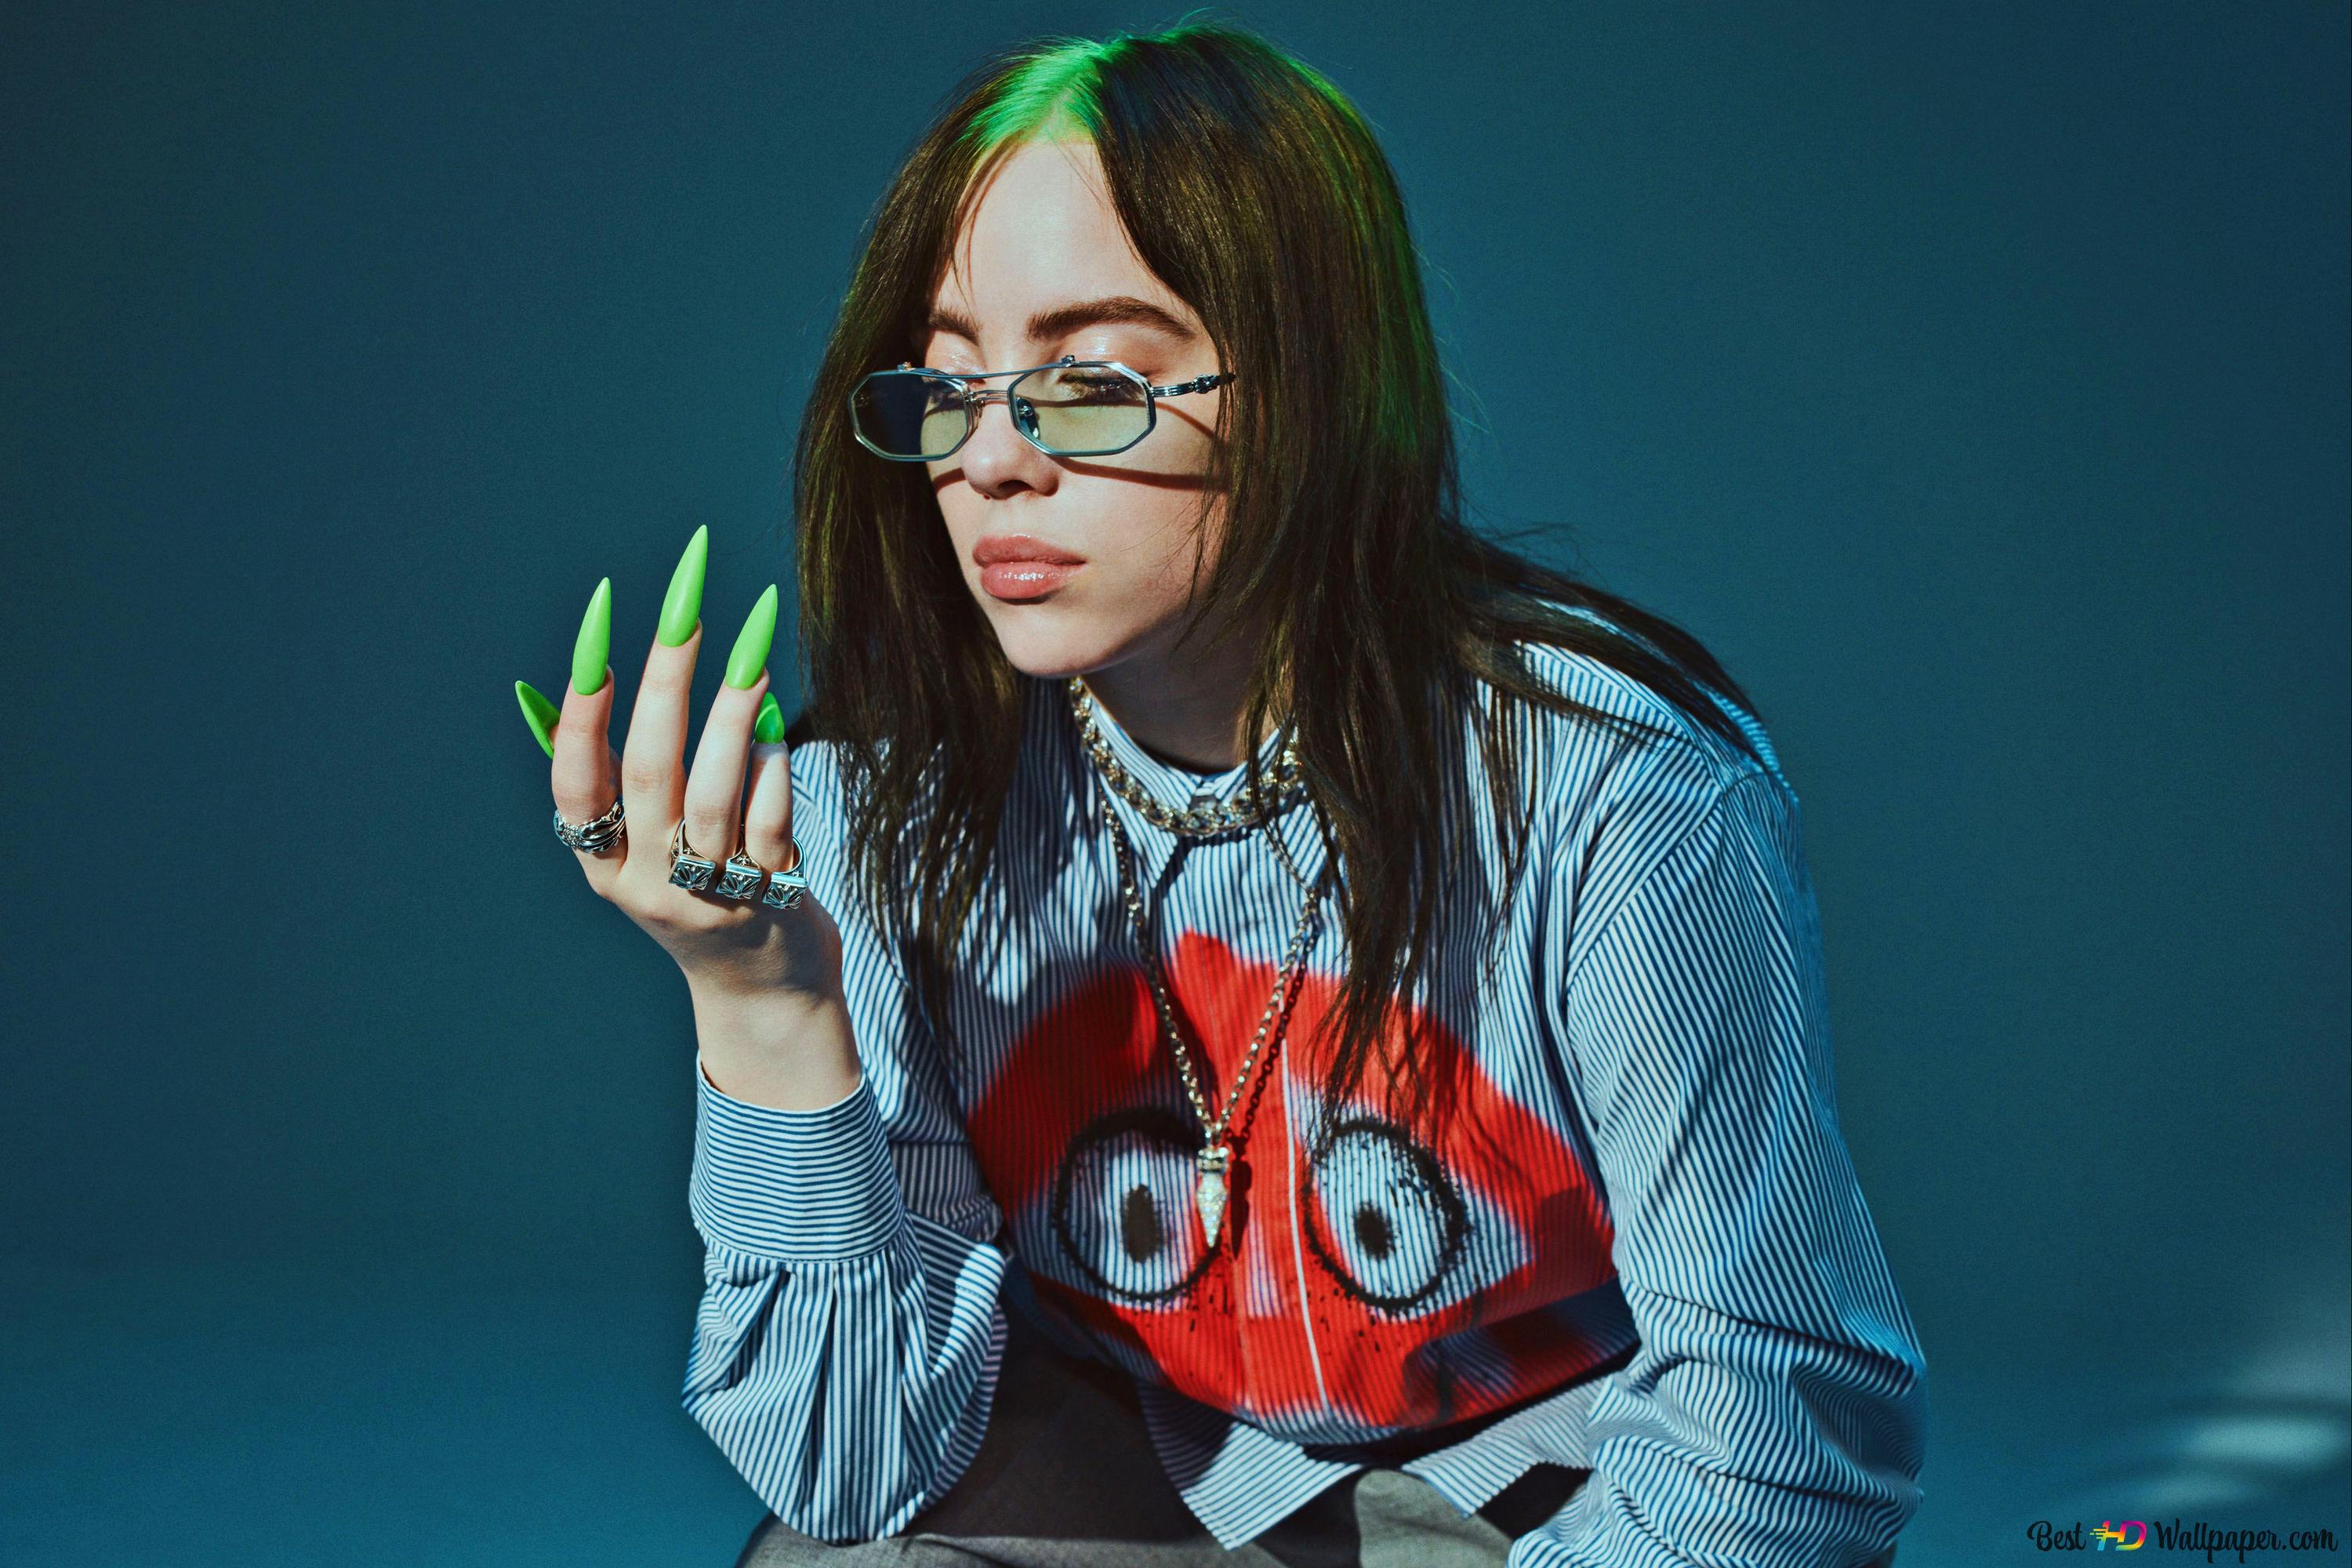 Cool singer Billie Eilish sitting in a stool with blue background 4K wallpaper download